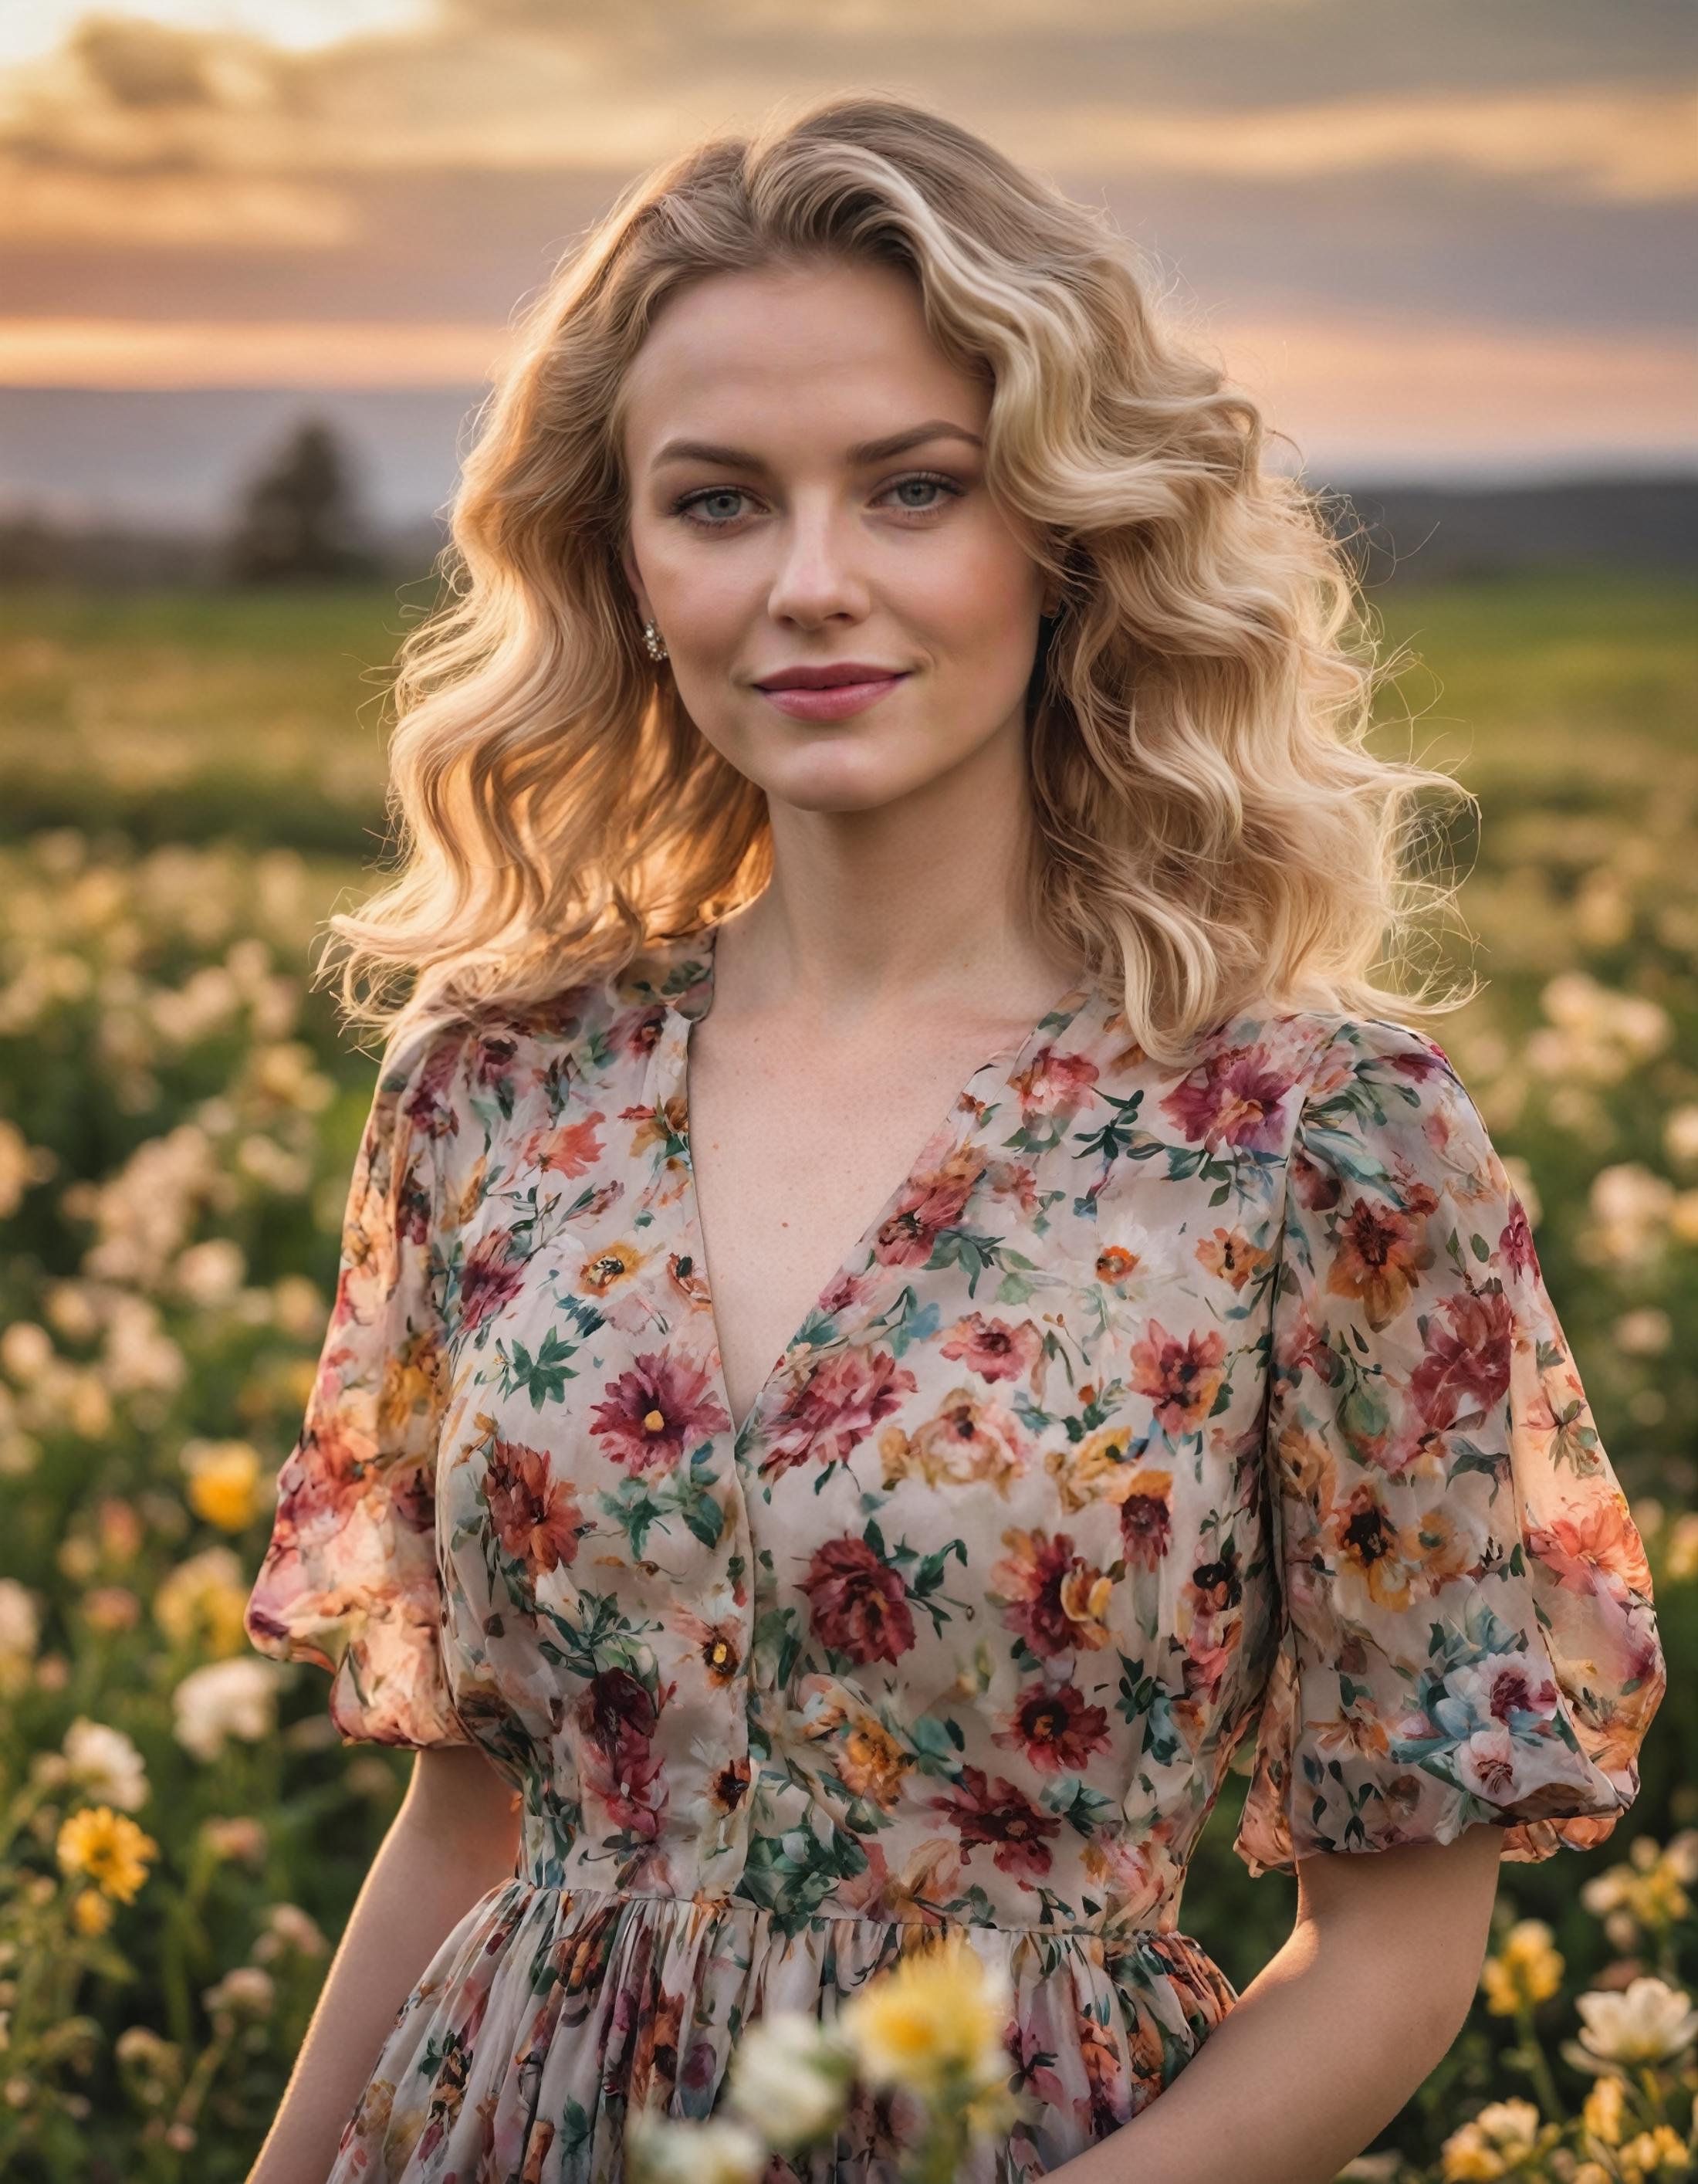 Blonde haired woman wearing a floral dress standing in a field of flowers.